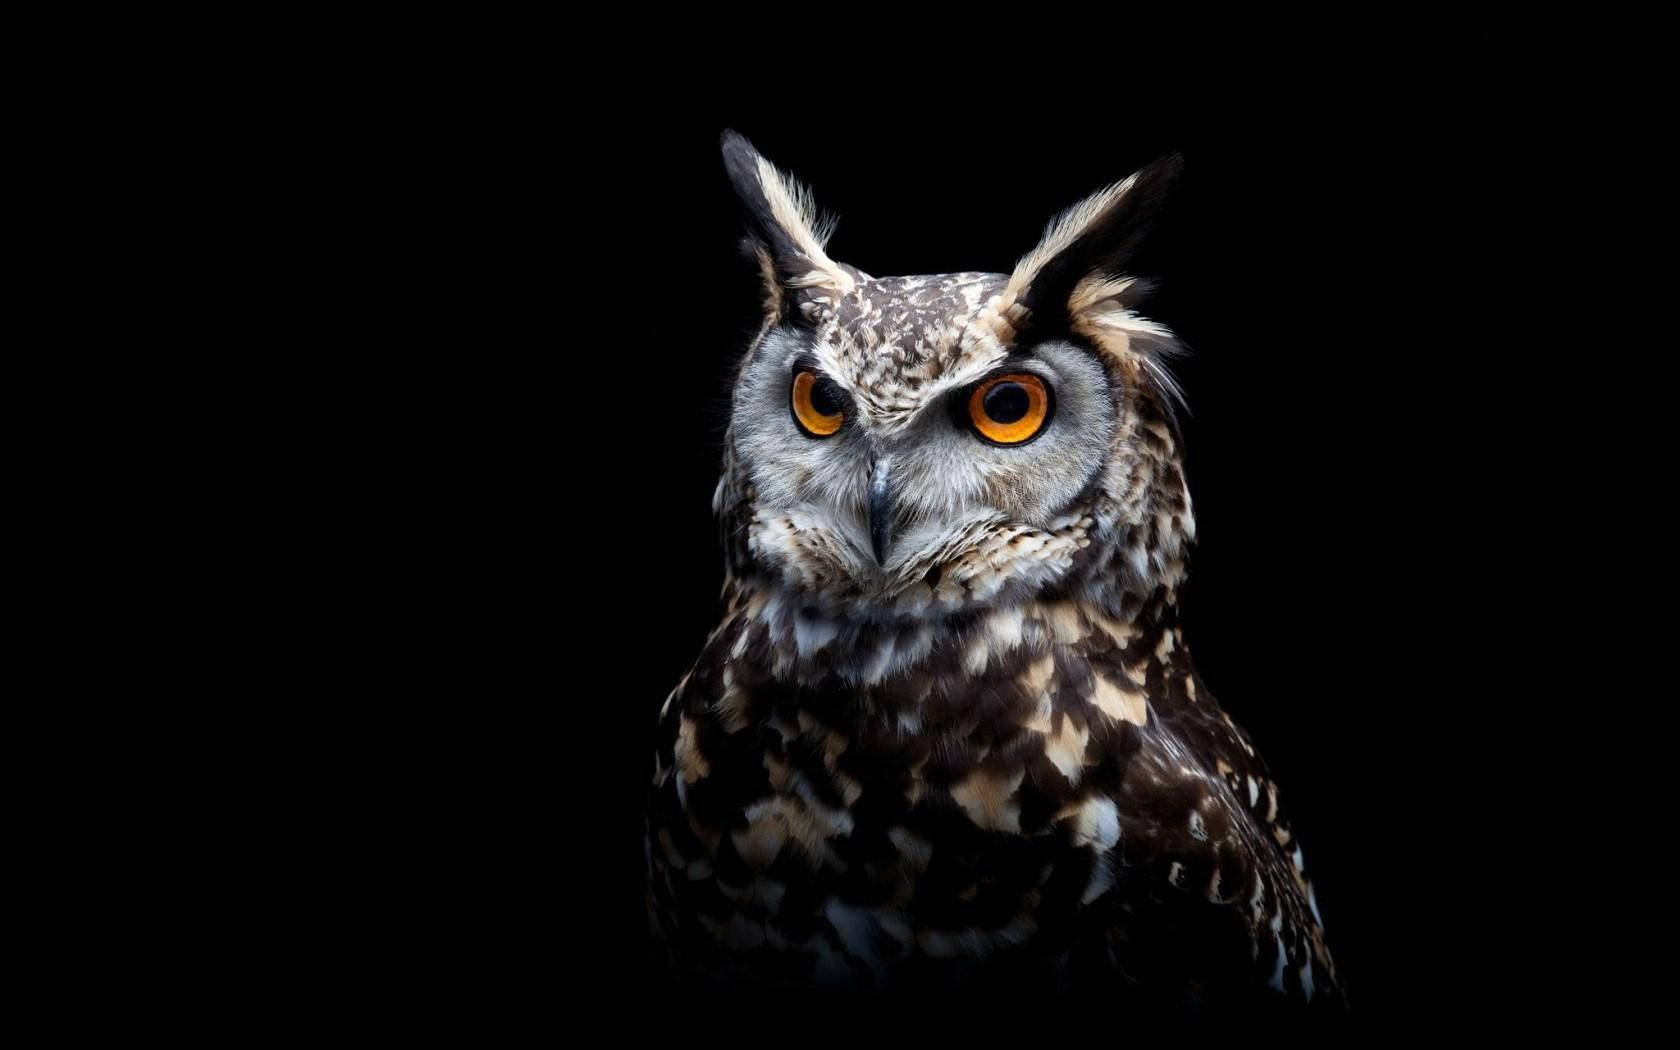 A Great Horned Owl Perched in the Shadows Wallpaper